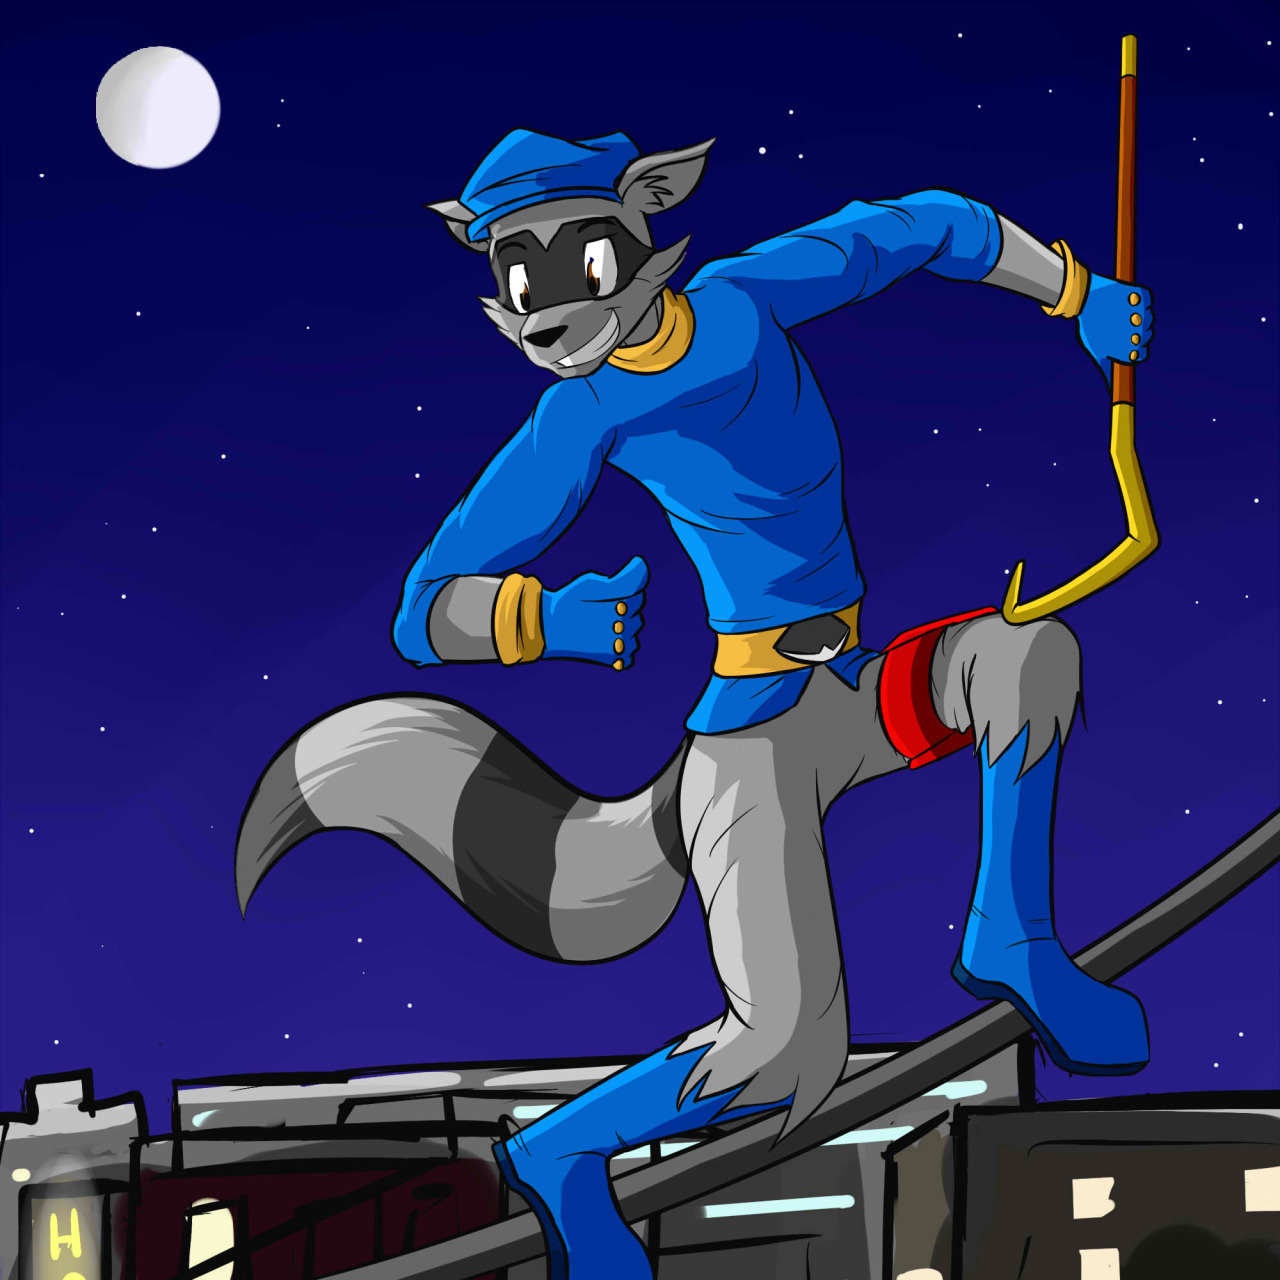 Sly Cooper - Rail Slide Finally played the first Sly Cooper game, so I decided to